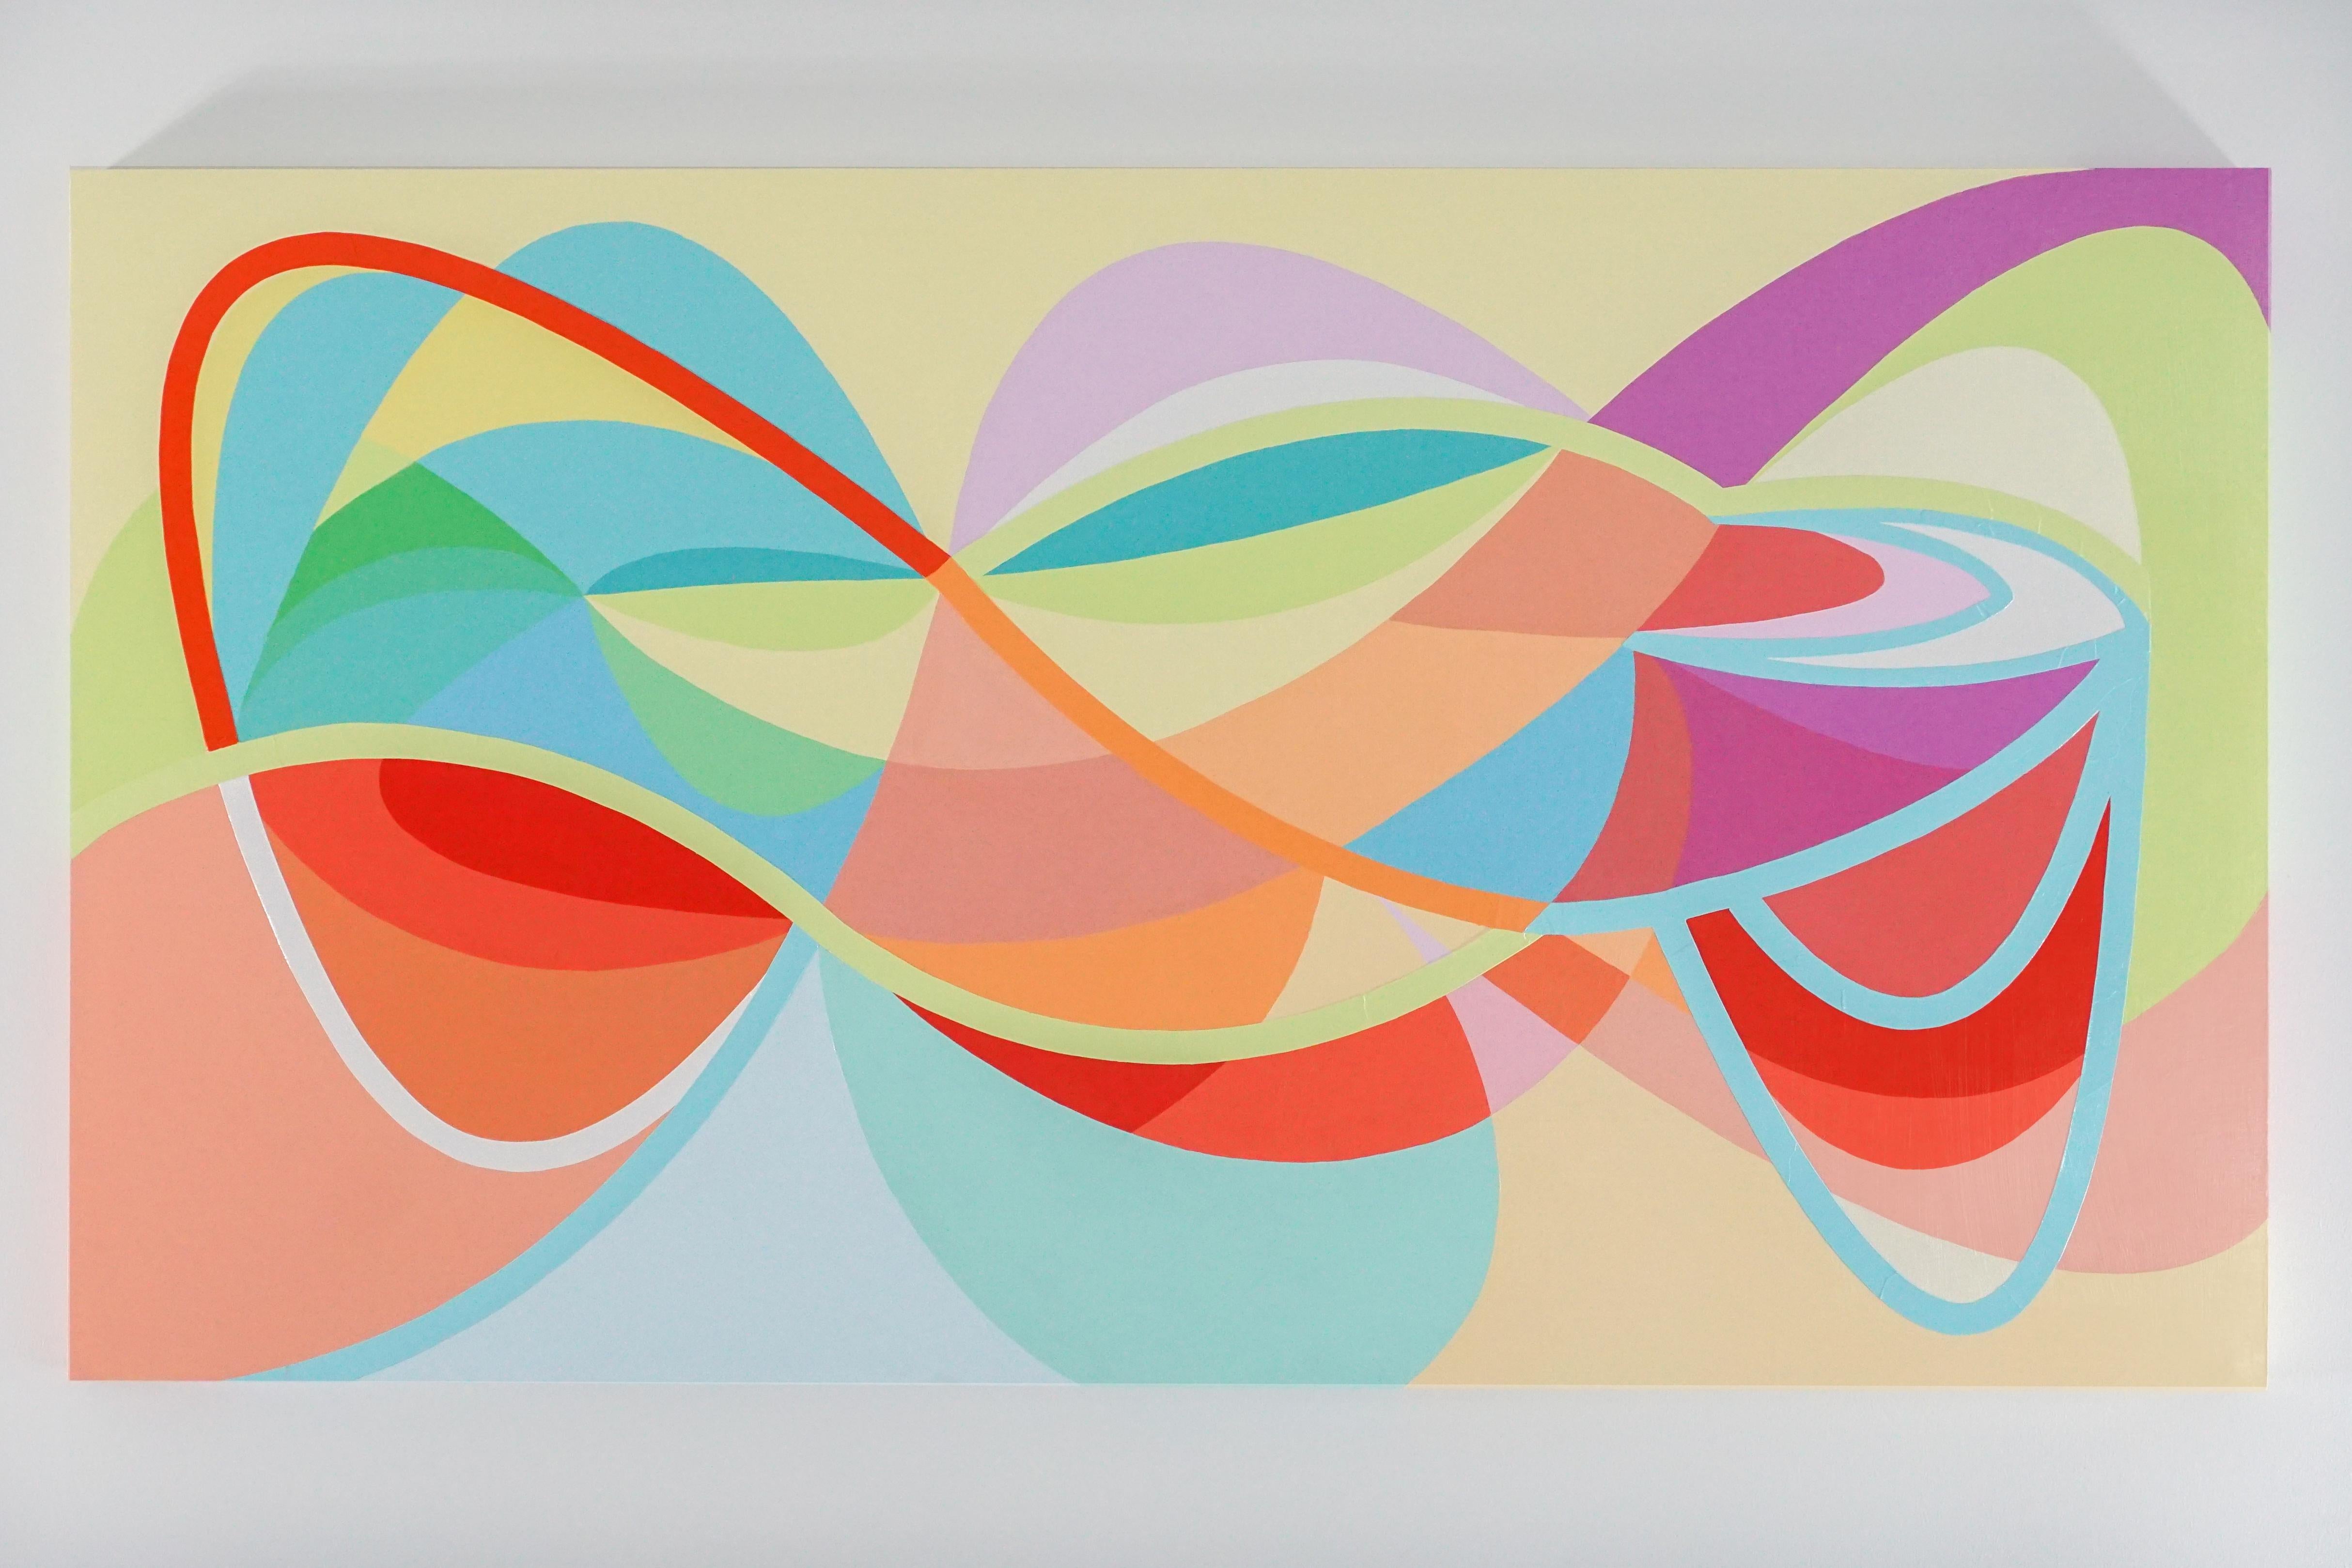 In this painting, Michelle Weddle utilizes line, color, and form to create a work which acts at the balance between the nonobjective and representational. Using a variety of bright, pastel colors in a wavy, photon-like shape, she expresses an